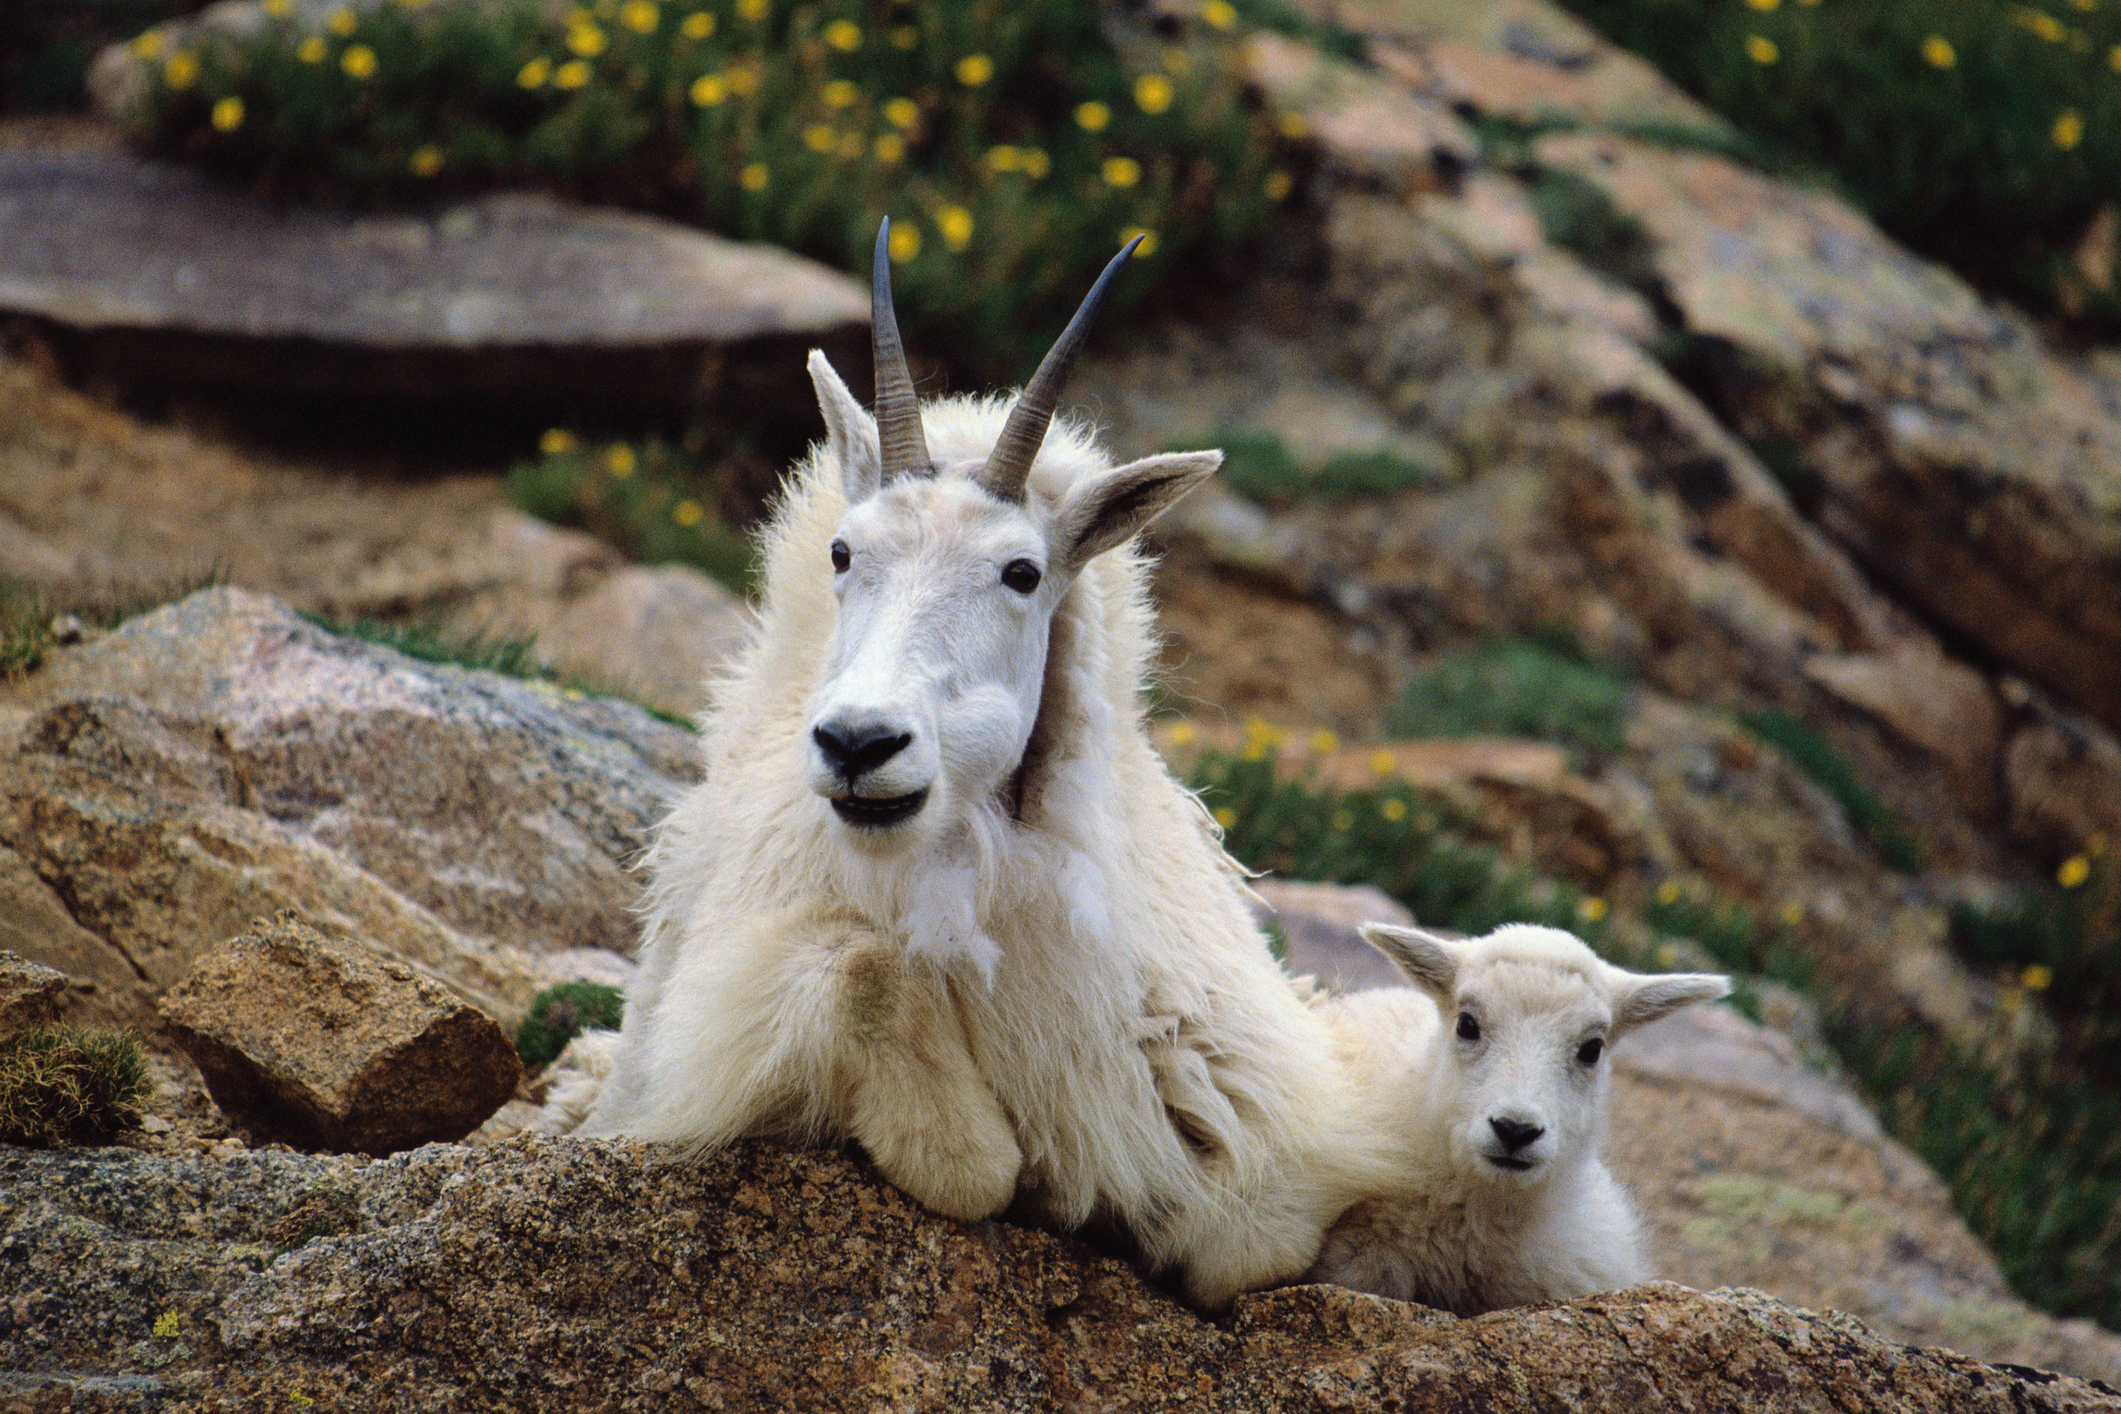 Adult and baby mountain goat resting on rocky terrain